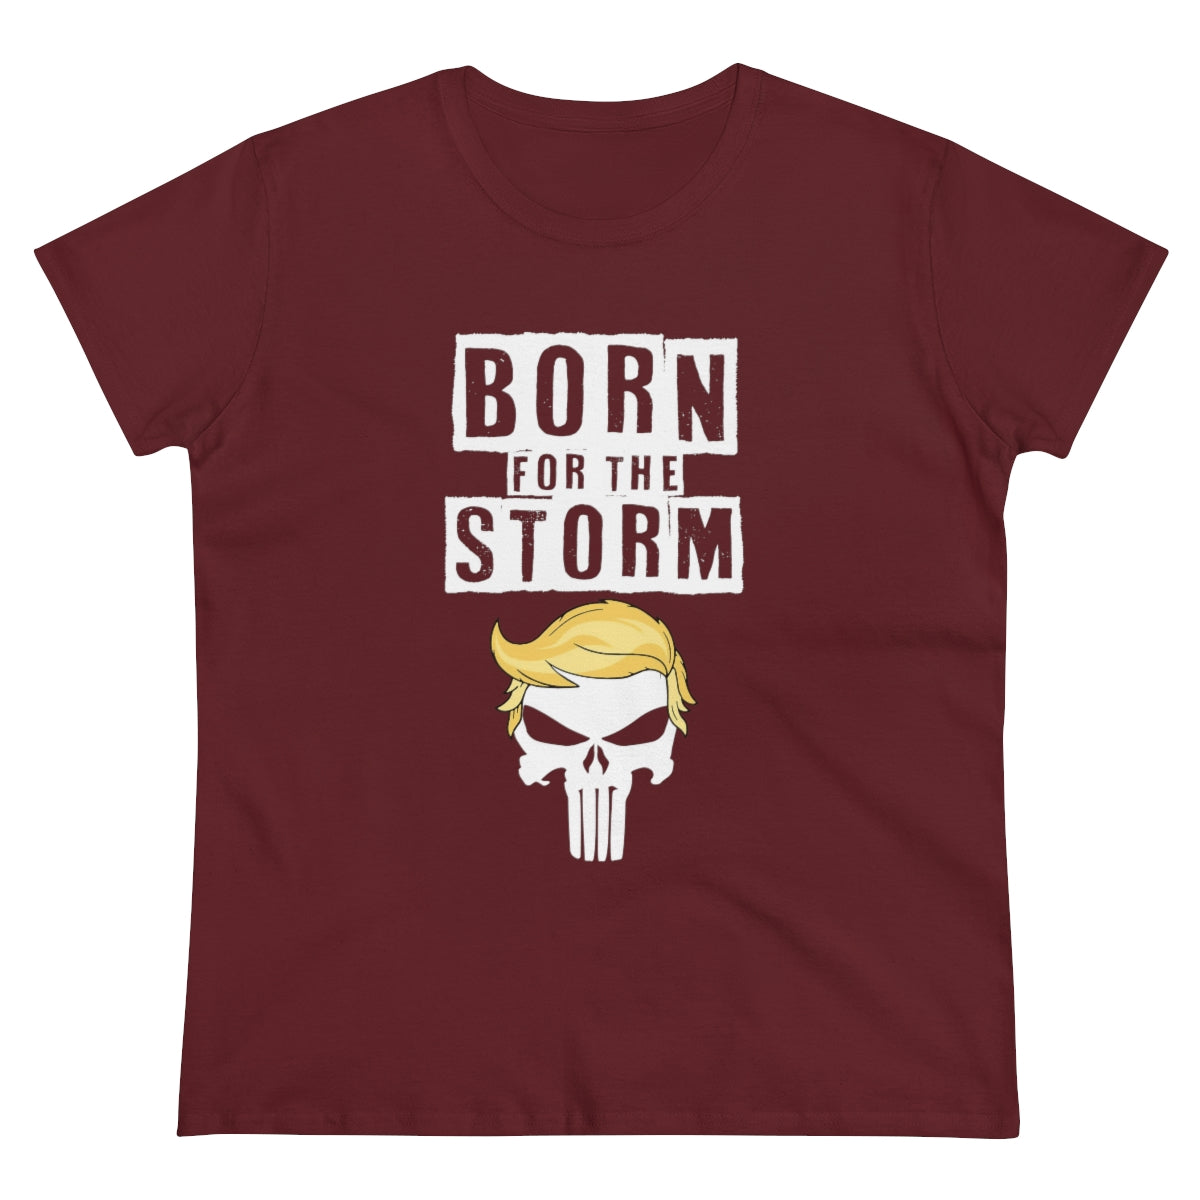 Born For The Storm | Women's Cotton Tee - Rise of The New Media